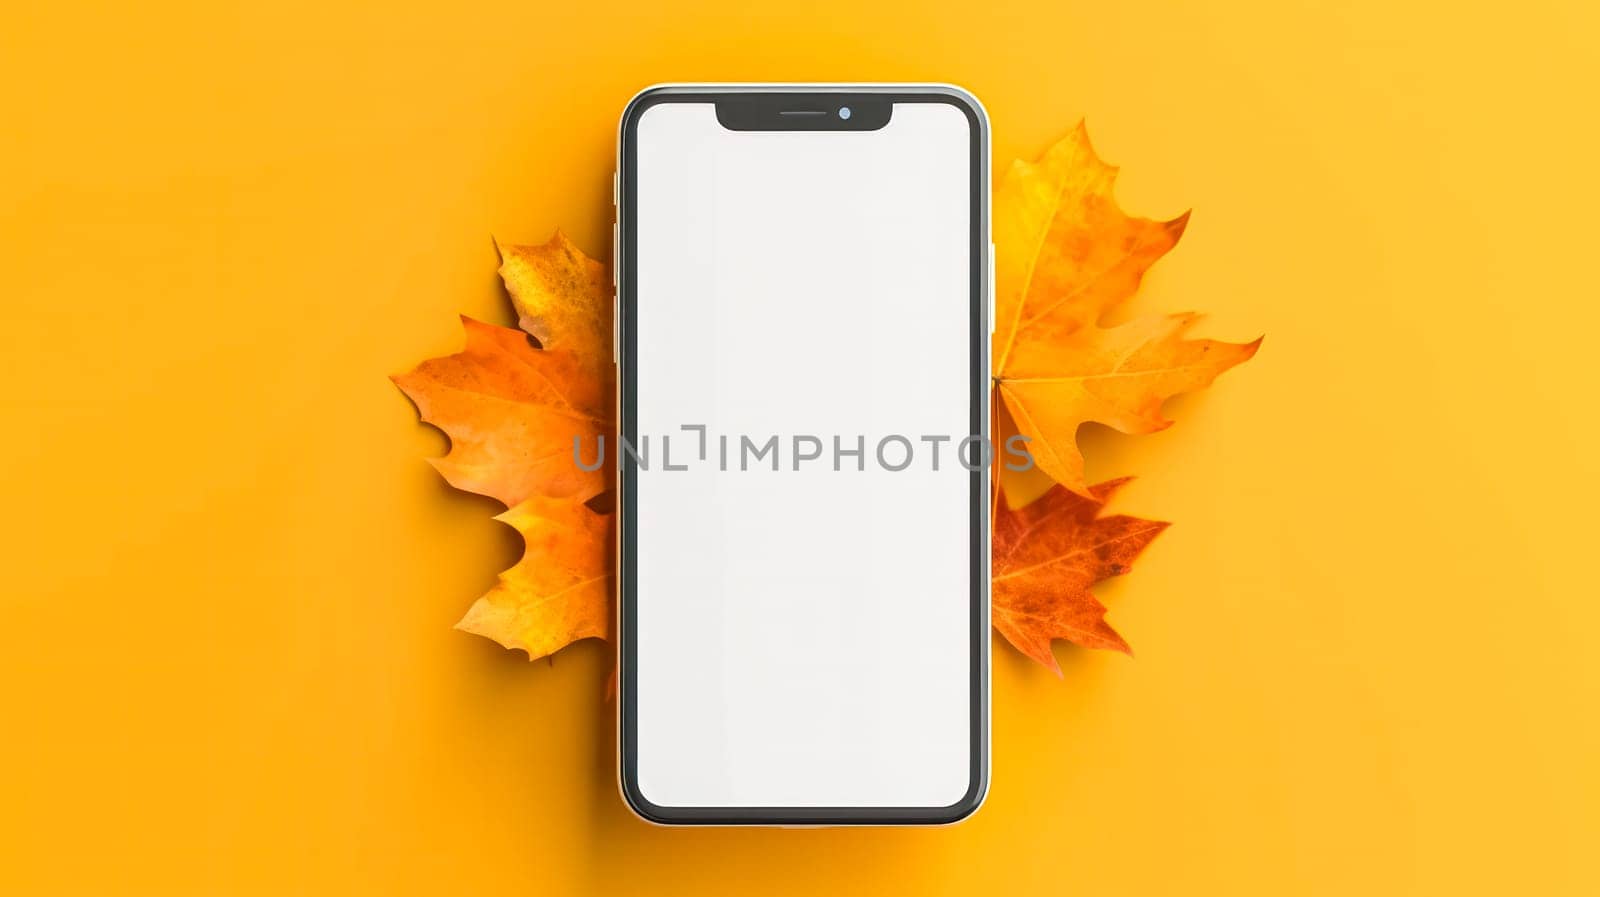 Mockup of a phone with a blank white screen, perfect for showcasing app designs, website layouts, or digital content in a professional manner.